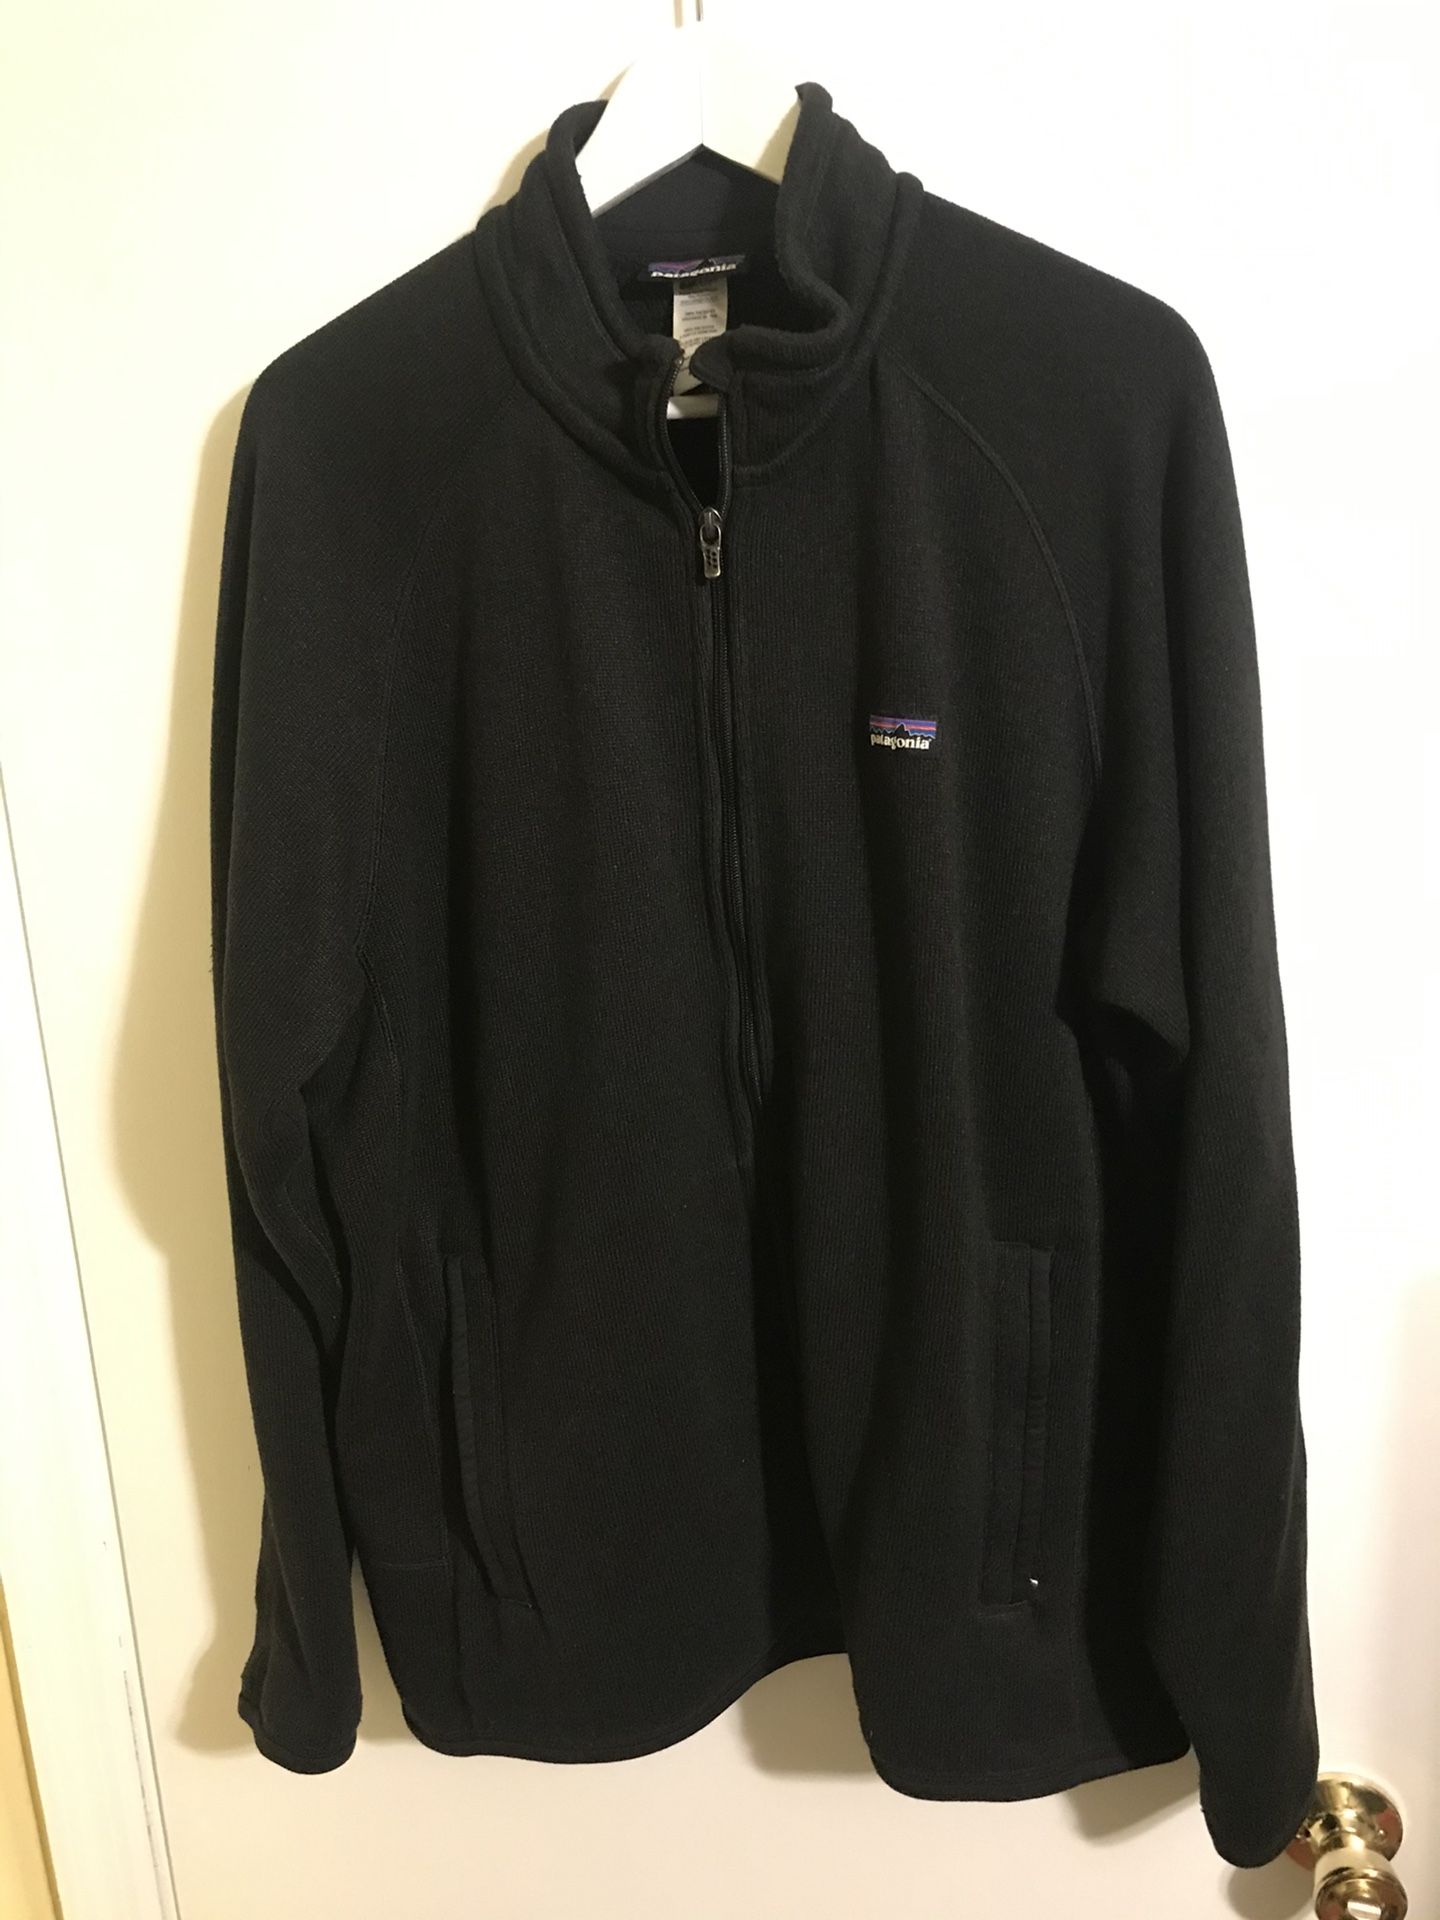 Patagonia Sweater Men’s Size Large In Very Good Condition